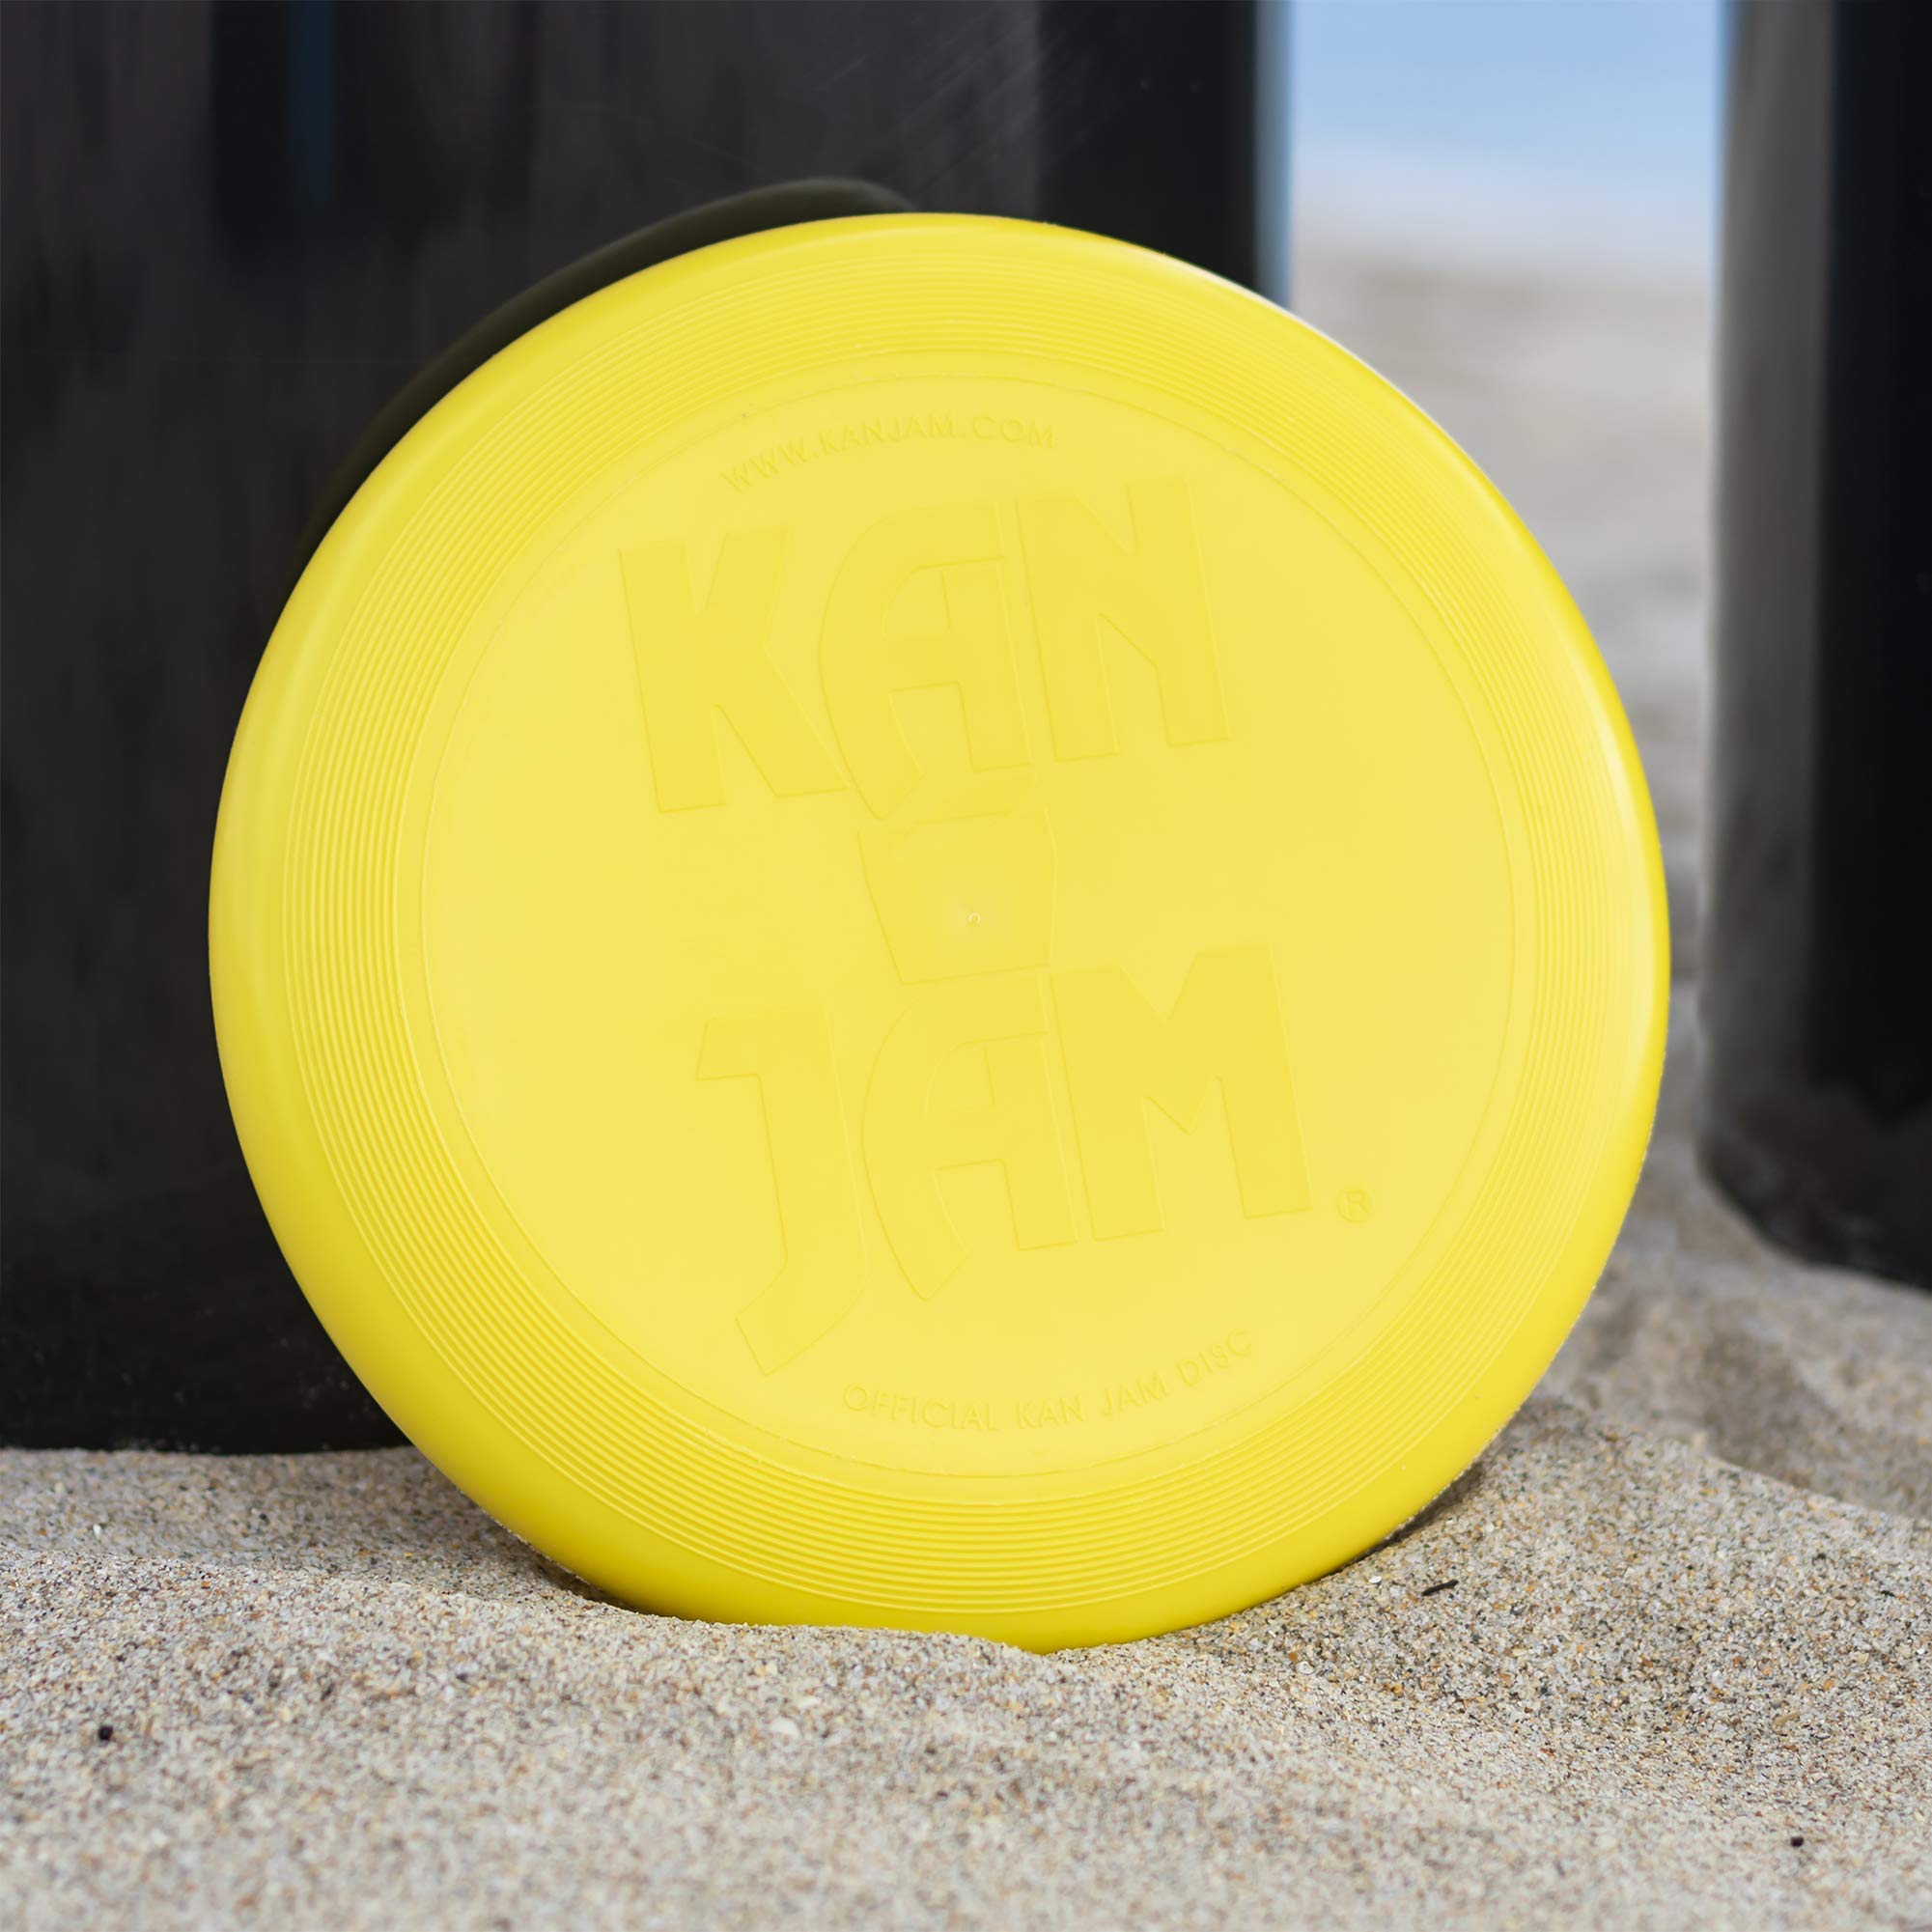 Kan Jam Disc Toss Game - American Made Outdoor Game for The Backyard, Beach, Park, Tailgates - Original, Illuminate, Pro, Travel Edition, and Carry Bag Only